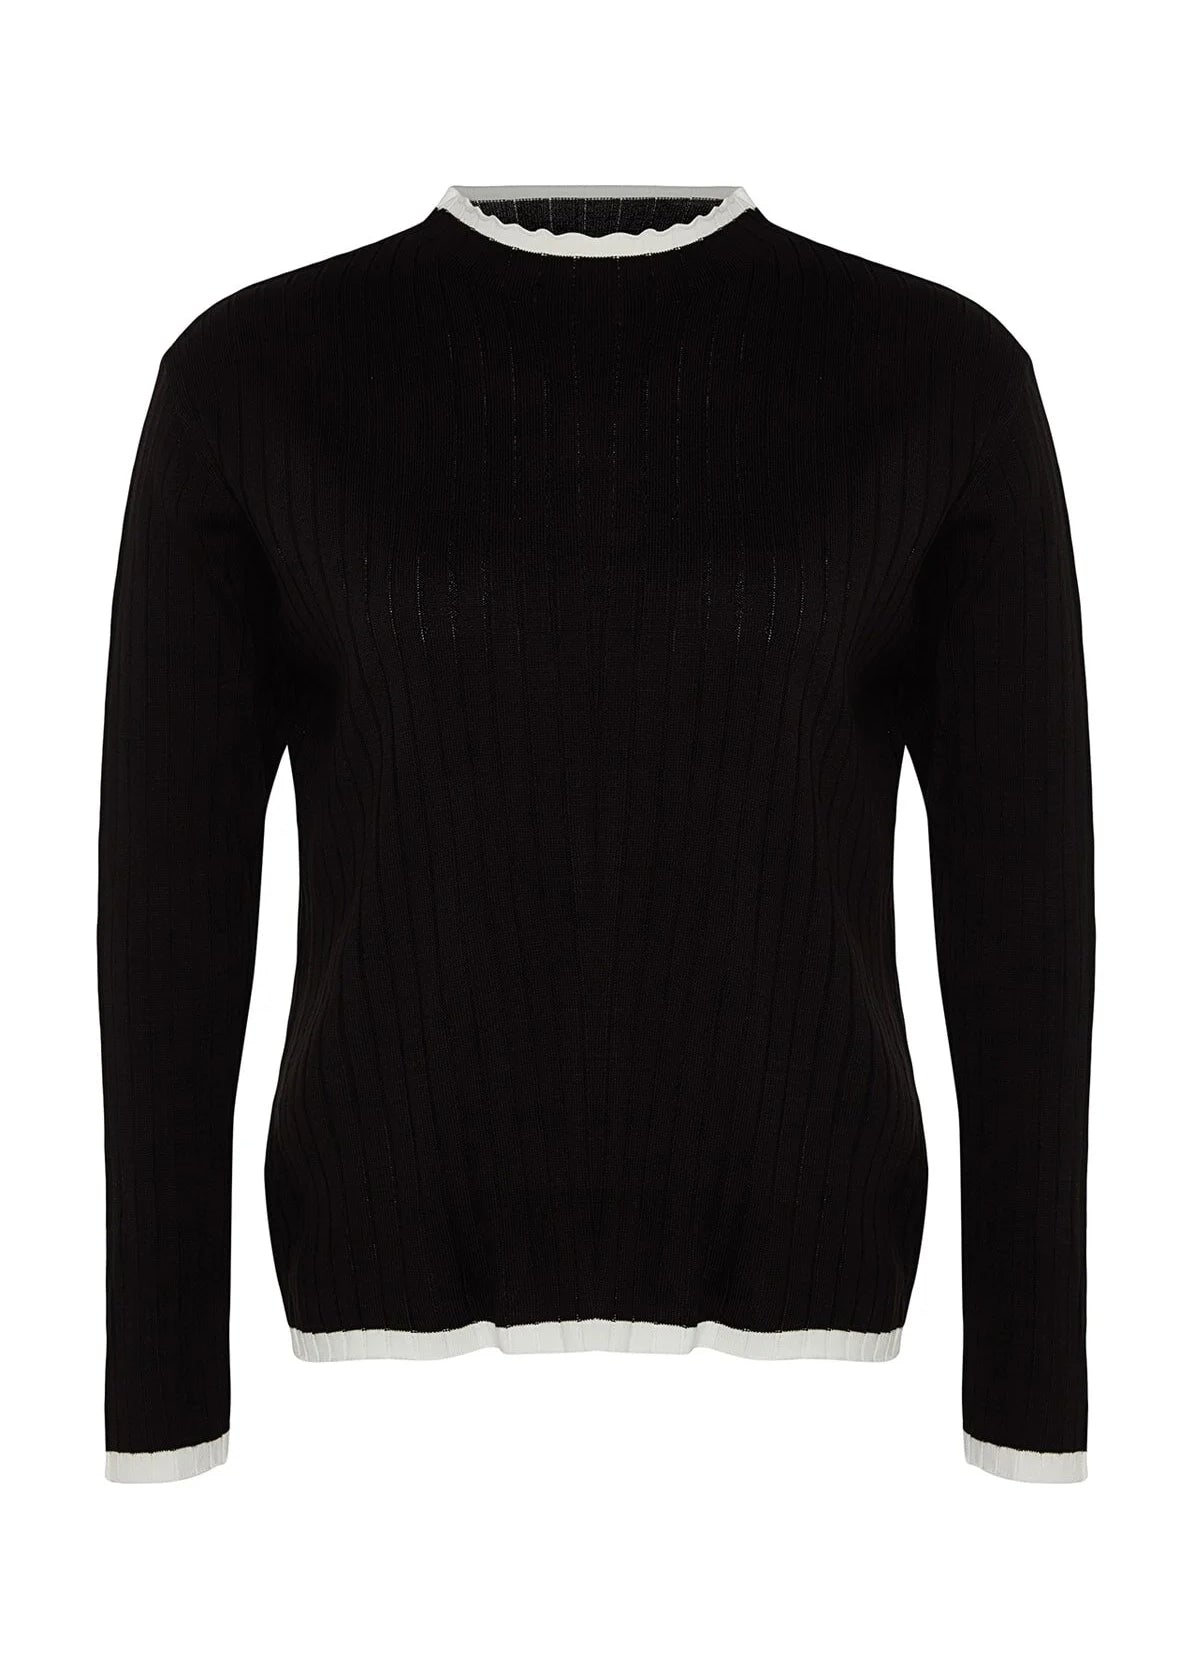 Plus Size Stripe Detailed Knitted Sweater - Black